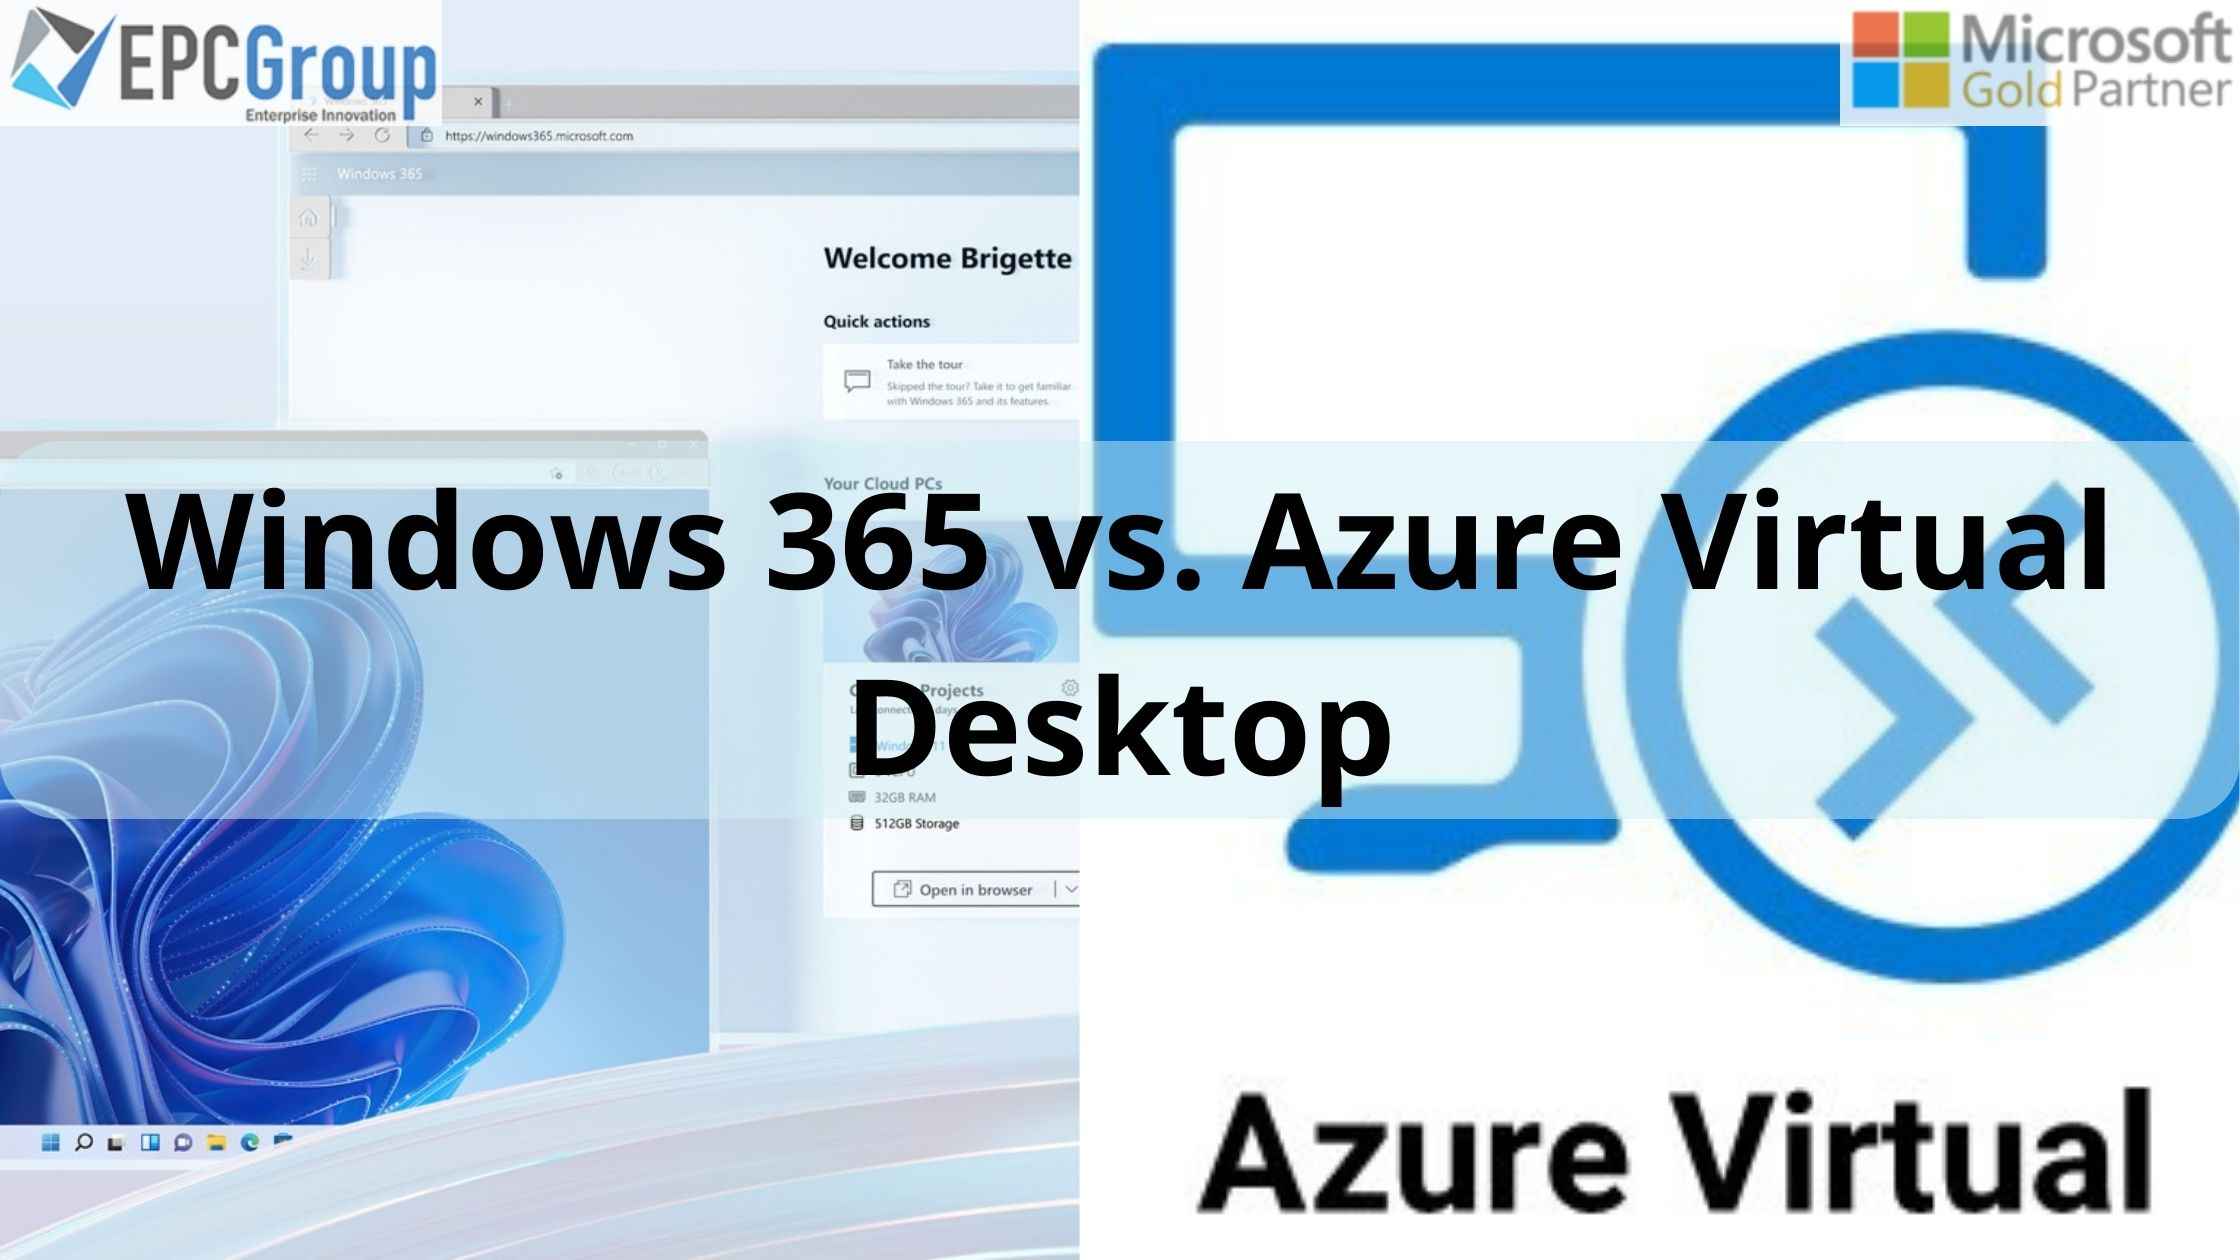 Windows 365 vs. Azure Virtual Desktop: Which Is Better for Programmers? - thumb image